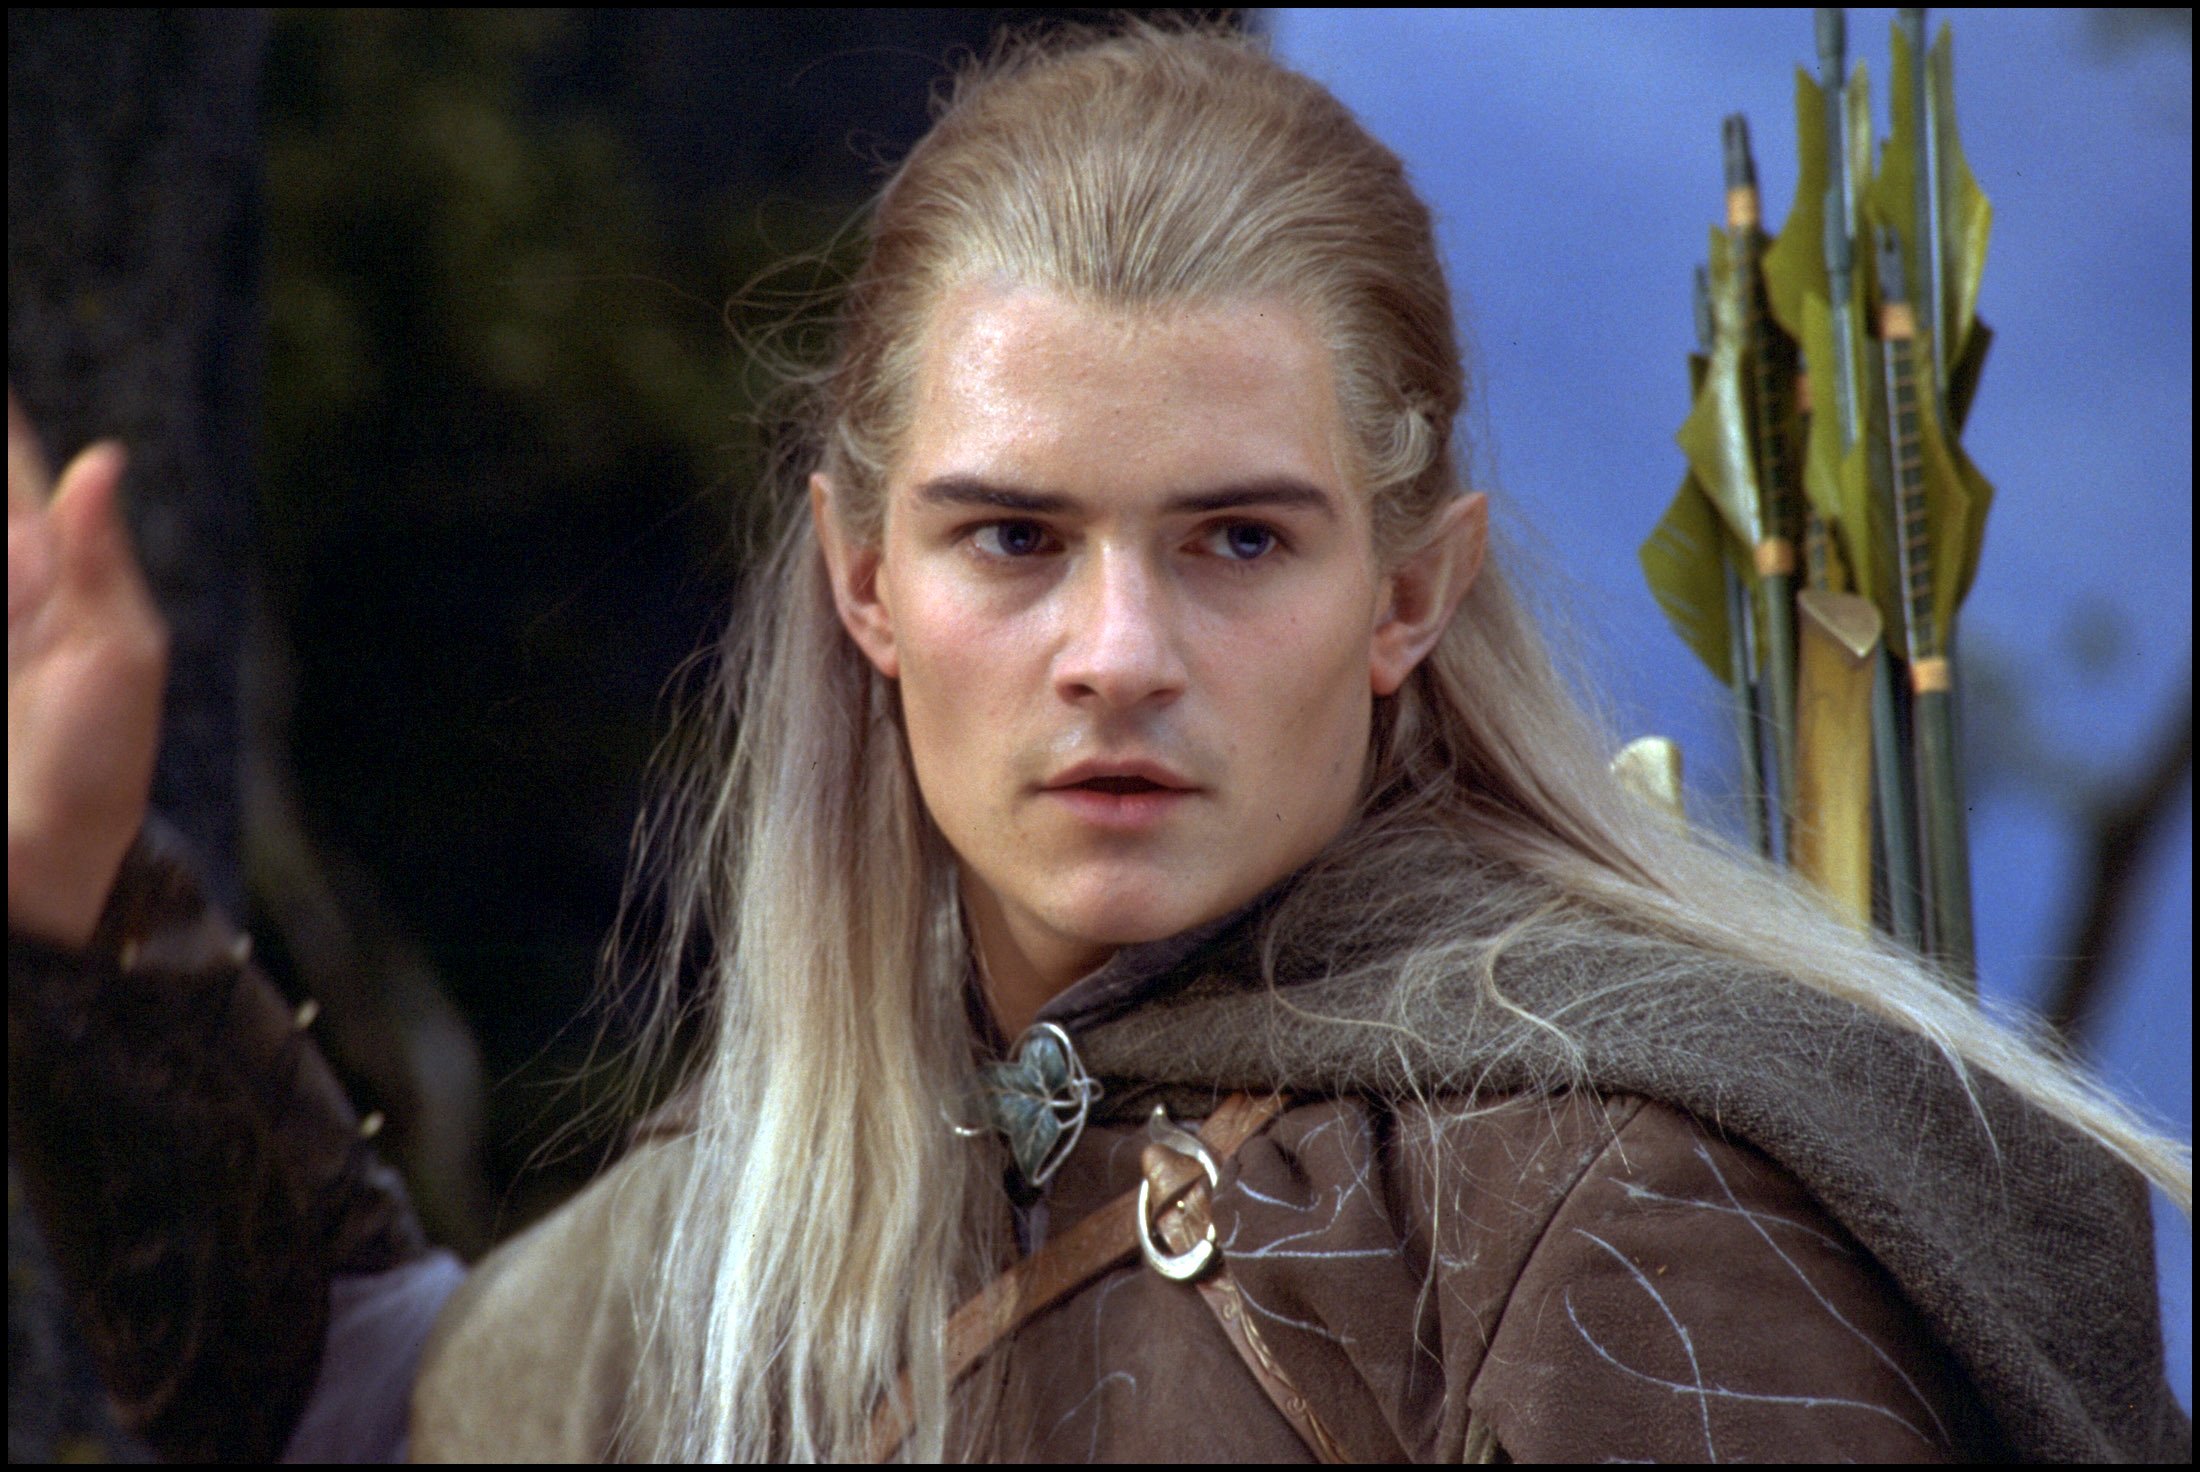 Orlando bloom from lord of the rings